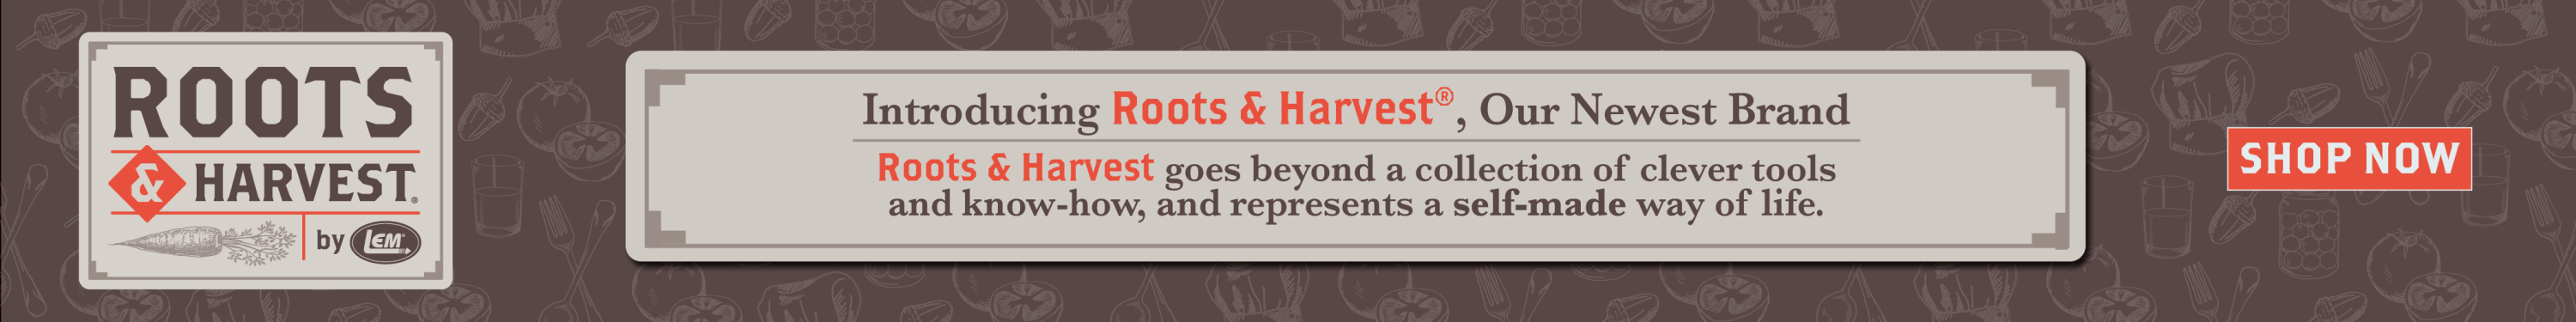 Roots & Harvest Homesteading Products